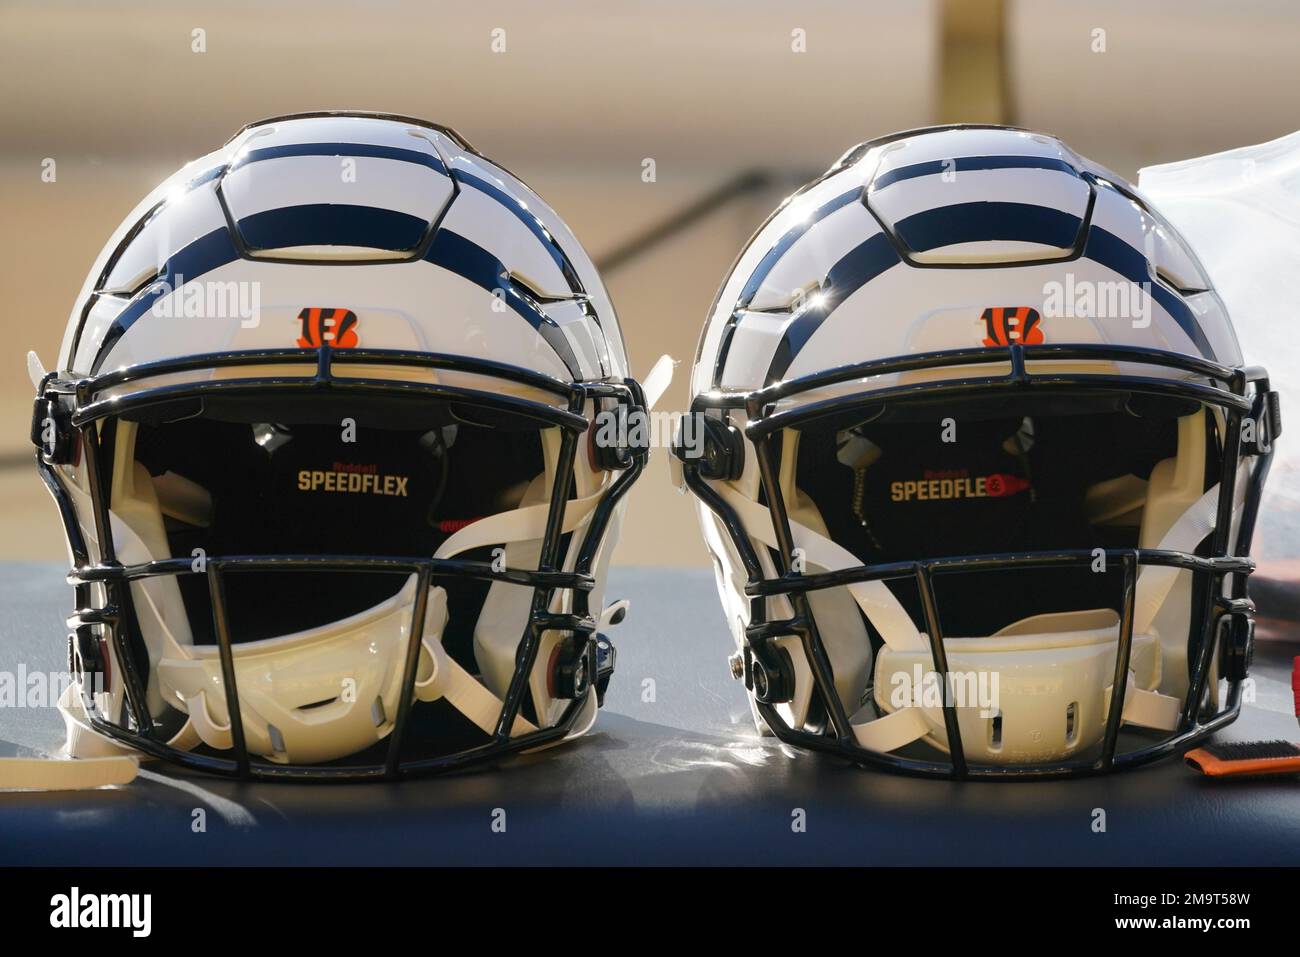 Why did the Cincinnati Bengals wear white helmets and uniforms on